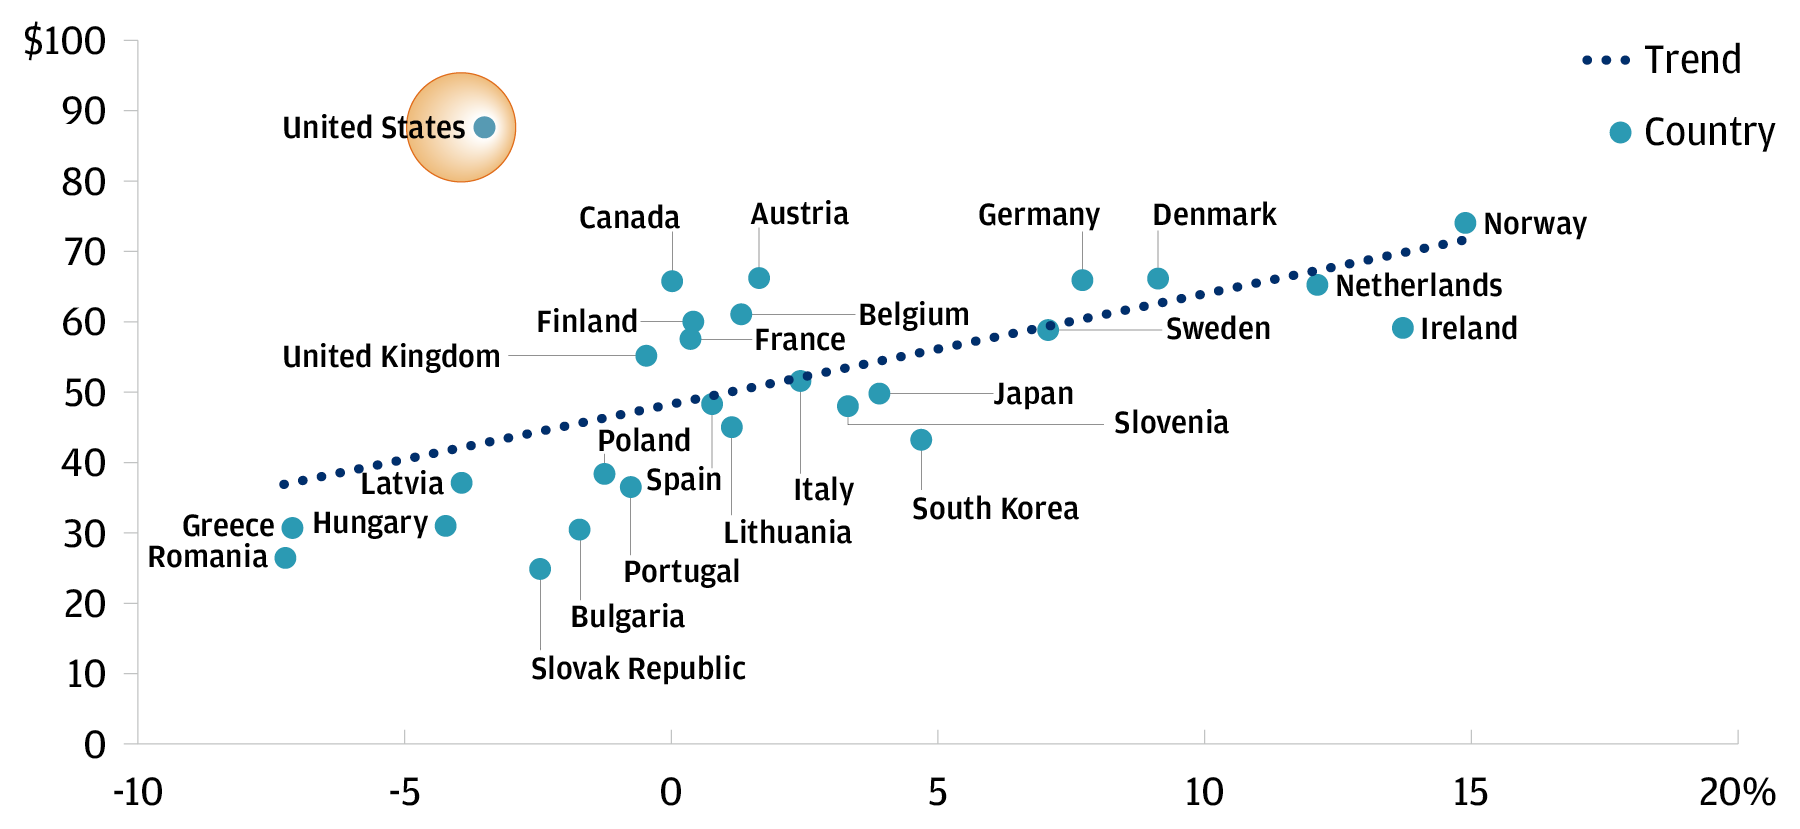 The chart describes average daily income in USD vs. current account balance as % of GDP for 27 countries.